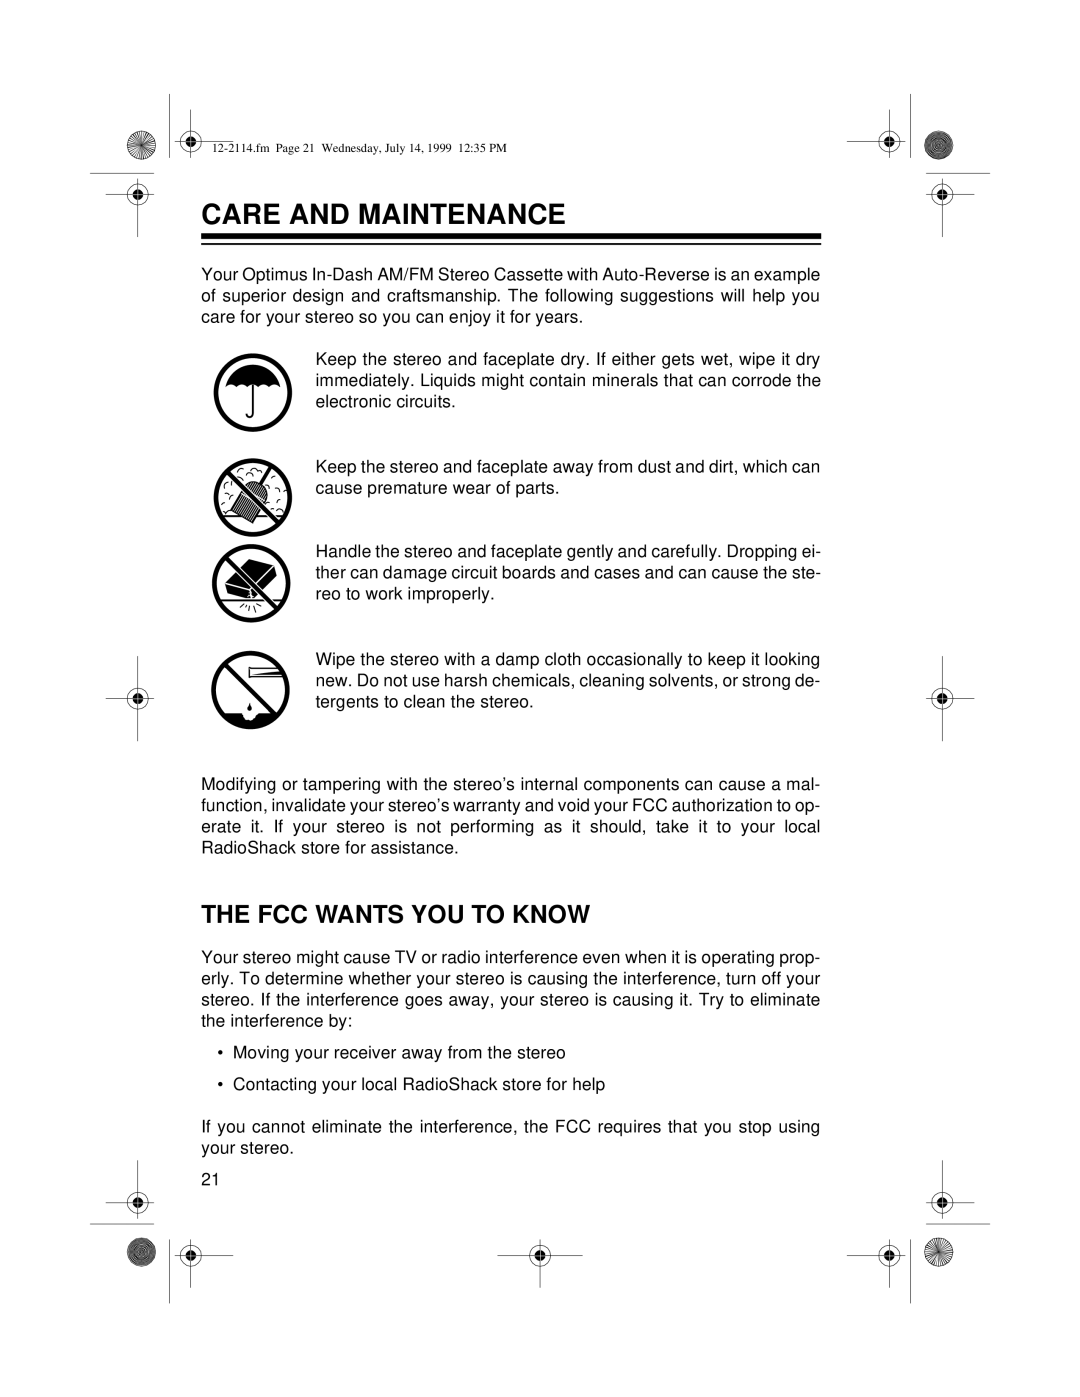 Optimus 12-2114, 4301-3838-0 owner manual Care And Maintenance, The Fcc Wants You To Know 